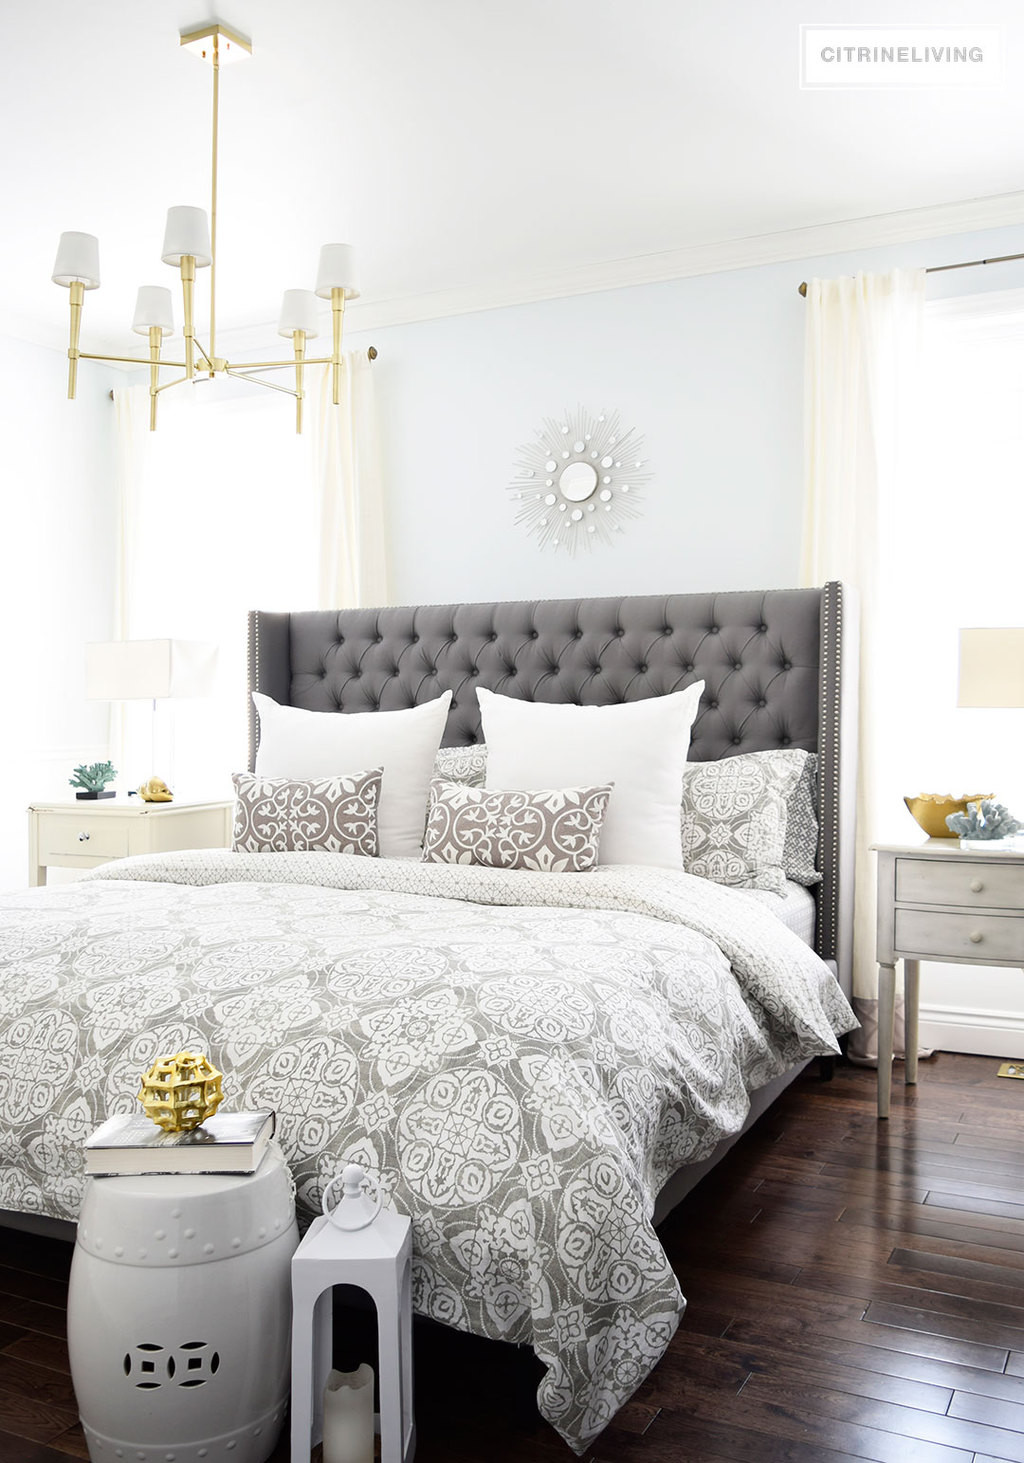 Modern Bedroom Chandeliers
 THREE SIMPLE TIPS TO CUSTOMIZE YOUR LIGHT FIXTURES